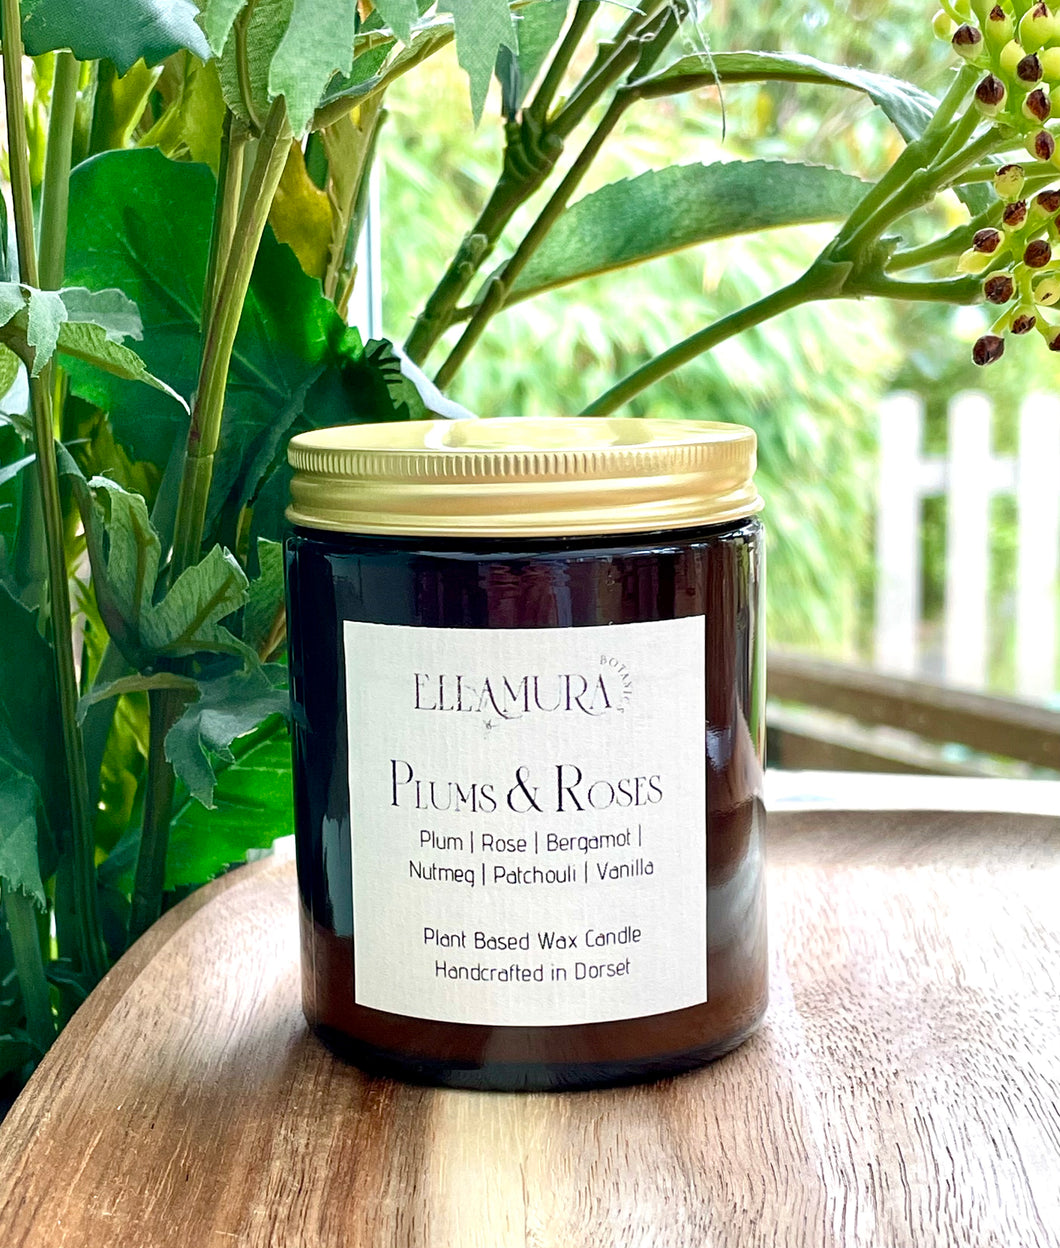 Plums & Roses Candle